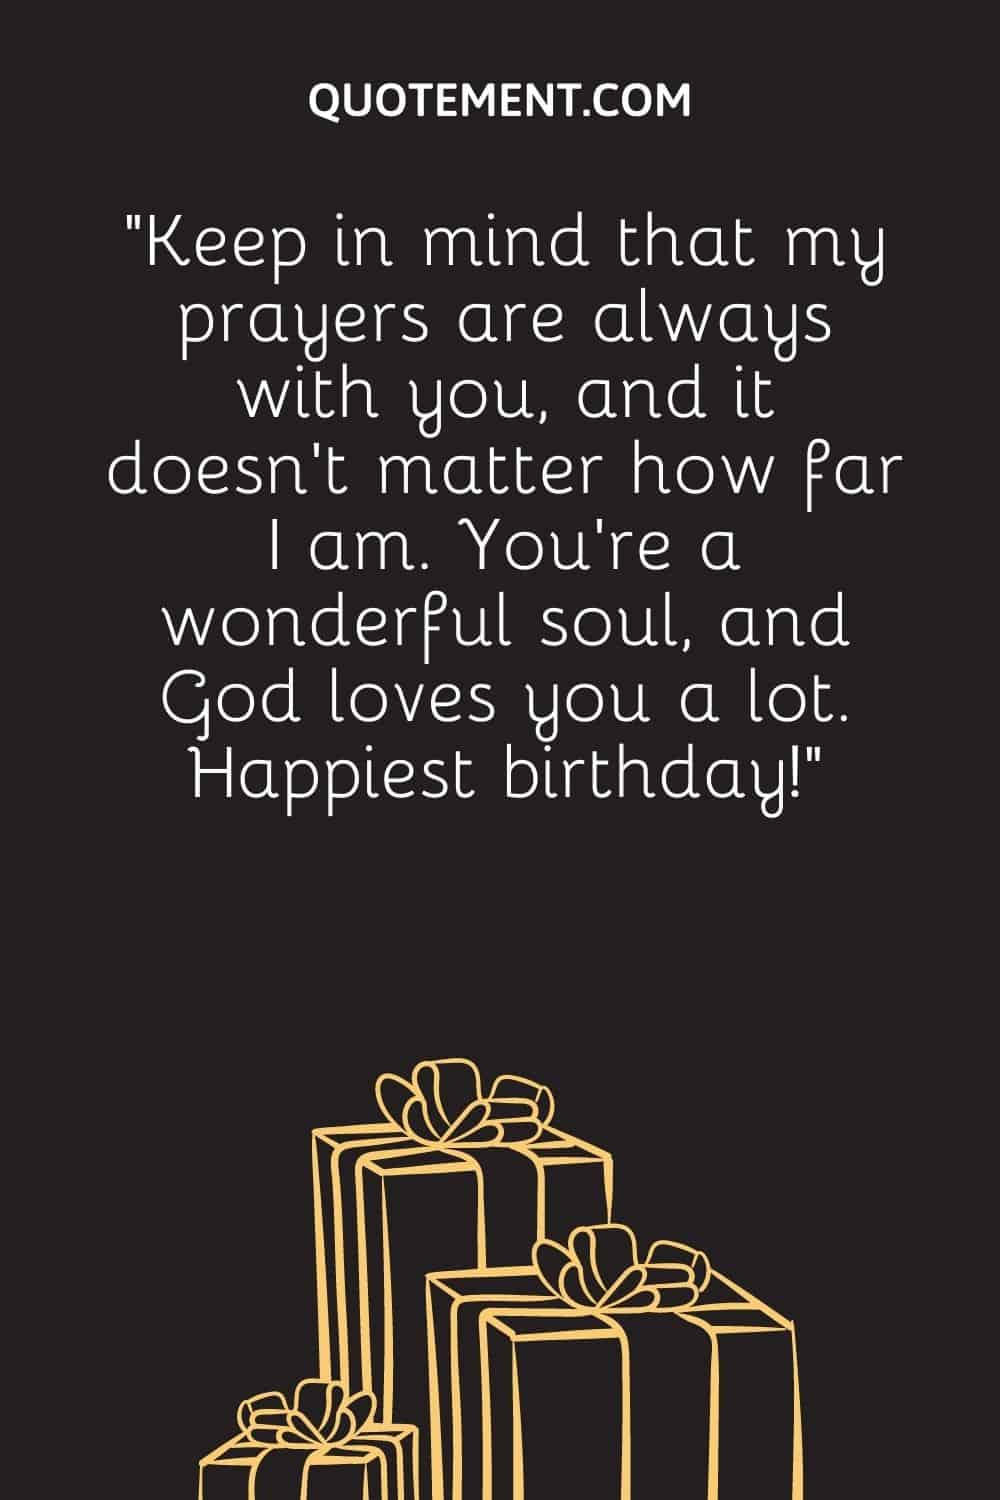 “Keep in mind that my prayers are always with you, and it doesn’t matter how far I am. You’re a wonderful soul, and God loves you a lot. Happiest birthday!”